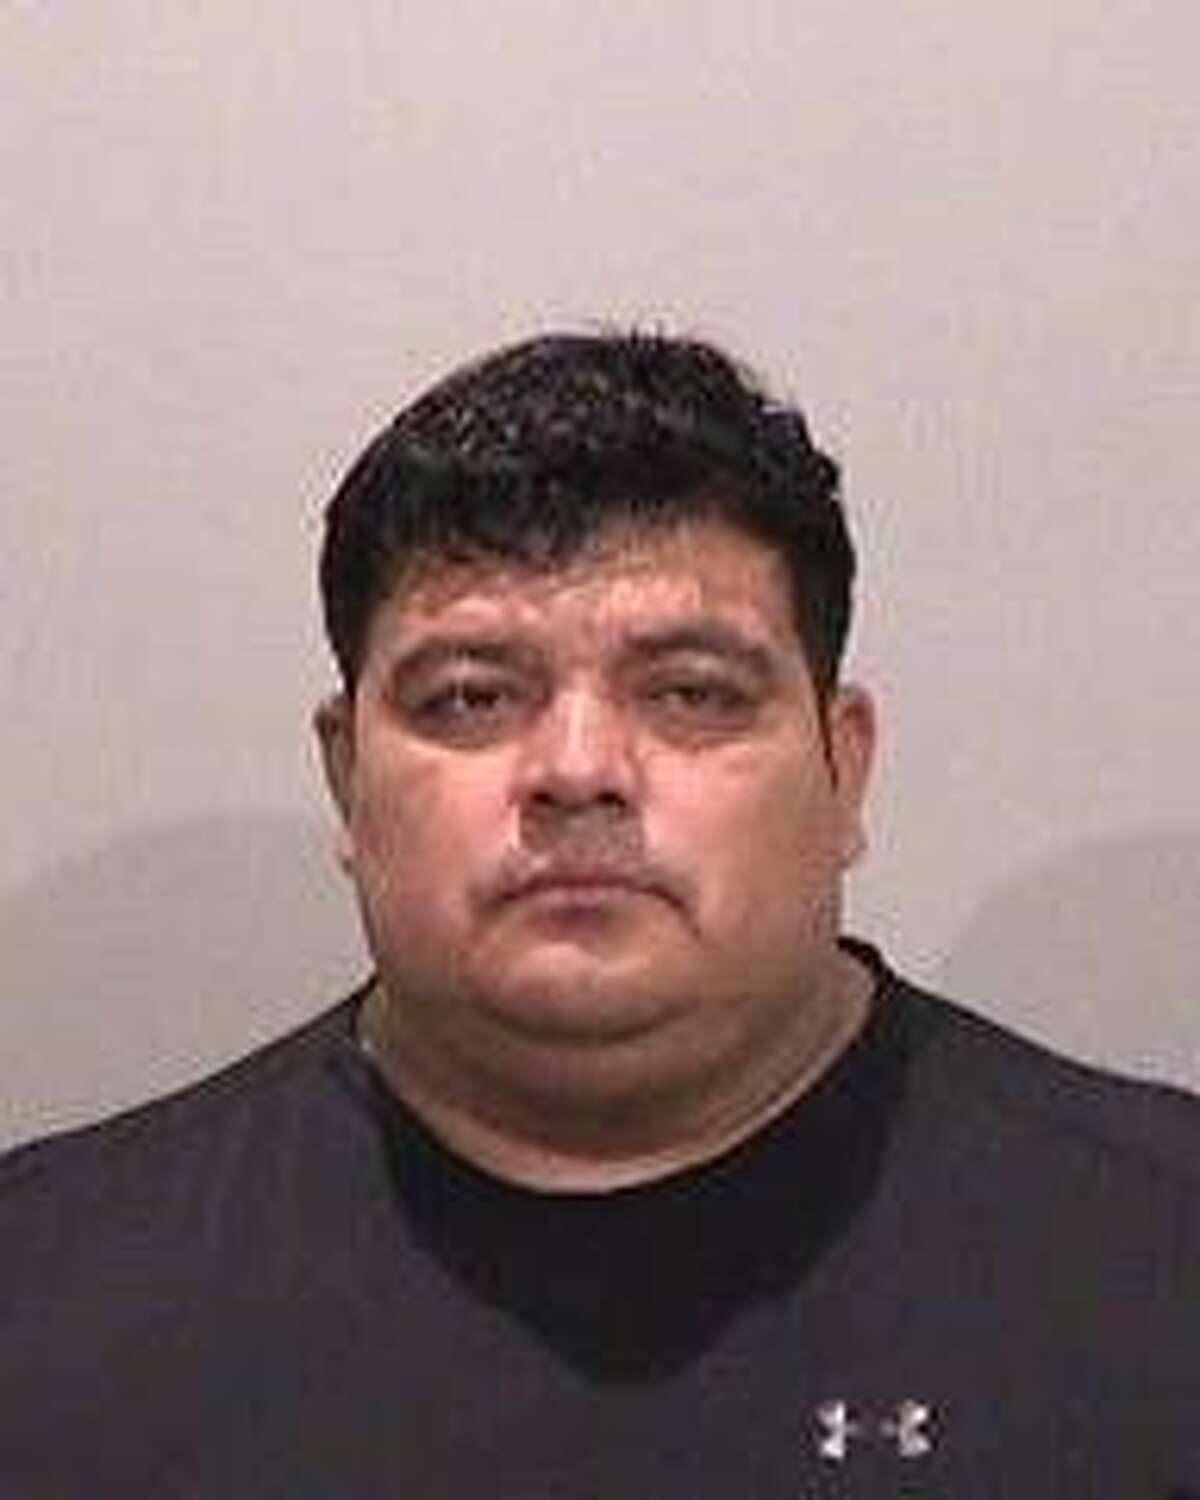 Juan Martinez, 47, of Newark was charged Tuesday with one count of murder, two counts of driving under the influence in a traffic crash causing injury to another person, and fleeing from the scene after an injury collision, according to the Fremont Police Department. On March 17, 2019, police say Martinez was involved in a crash on  Central Avenue near Blacow Road in Fremont that killed Erlinda Domingo, 70, of Newark.